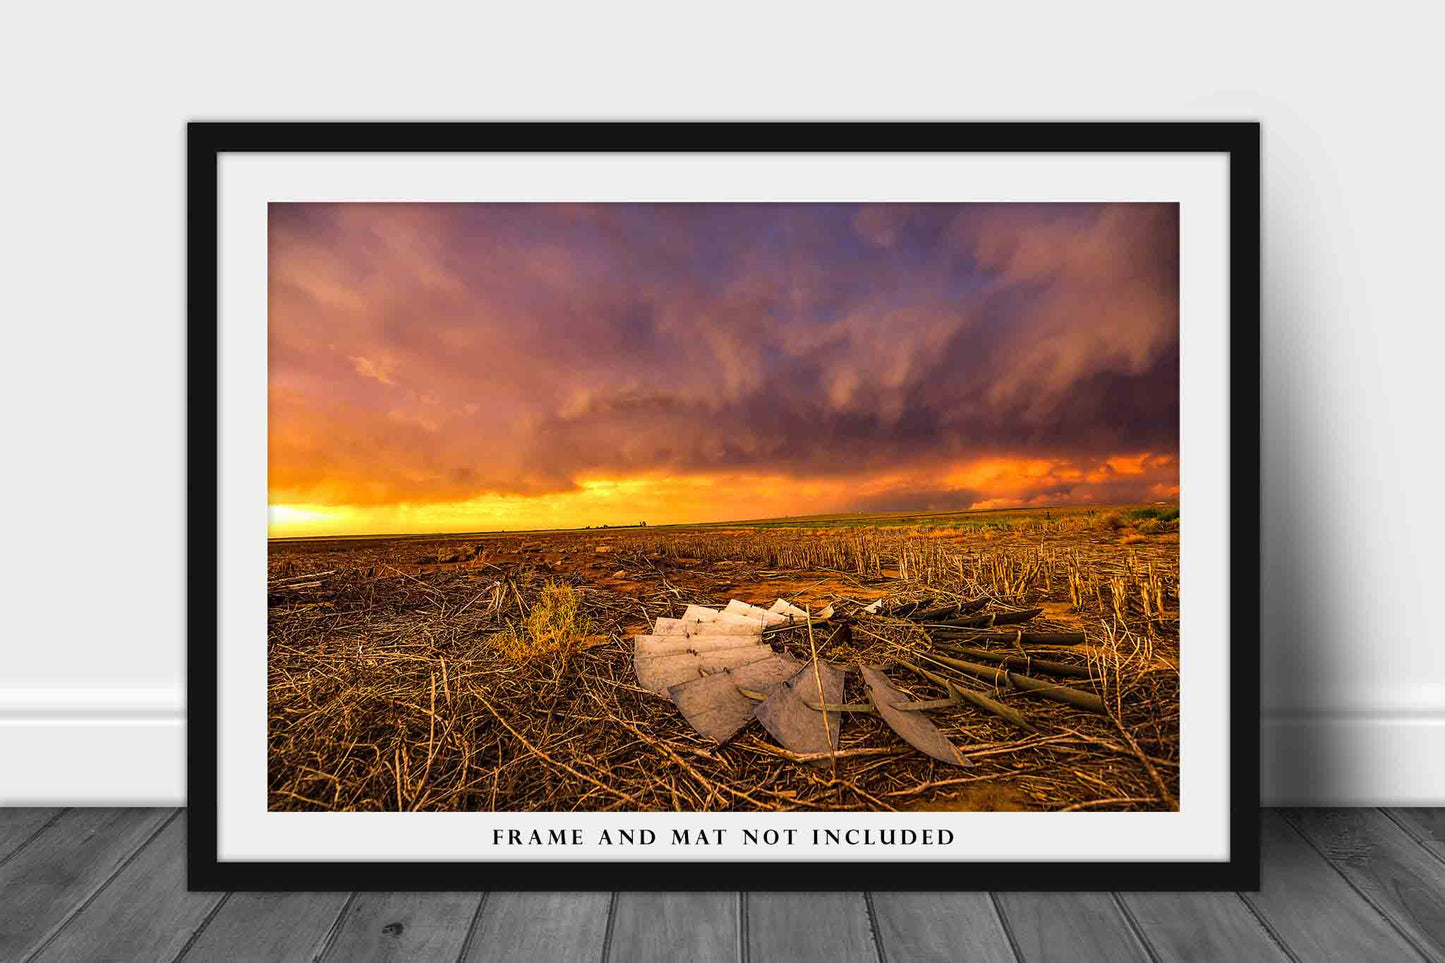 Country Photography Print - Kansas Wall Art Picture of Windmill Turbine in Field on Stormy Evening Farm Photo Farmhouse Decor 5x7 to 40x60